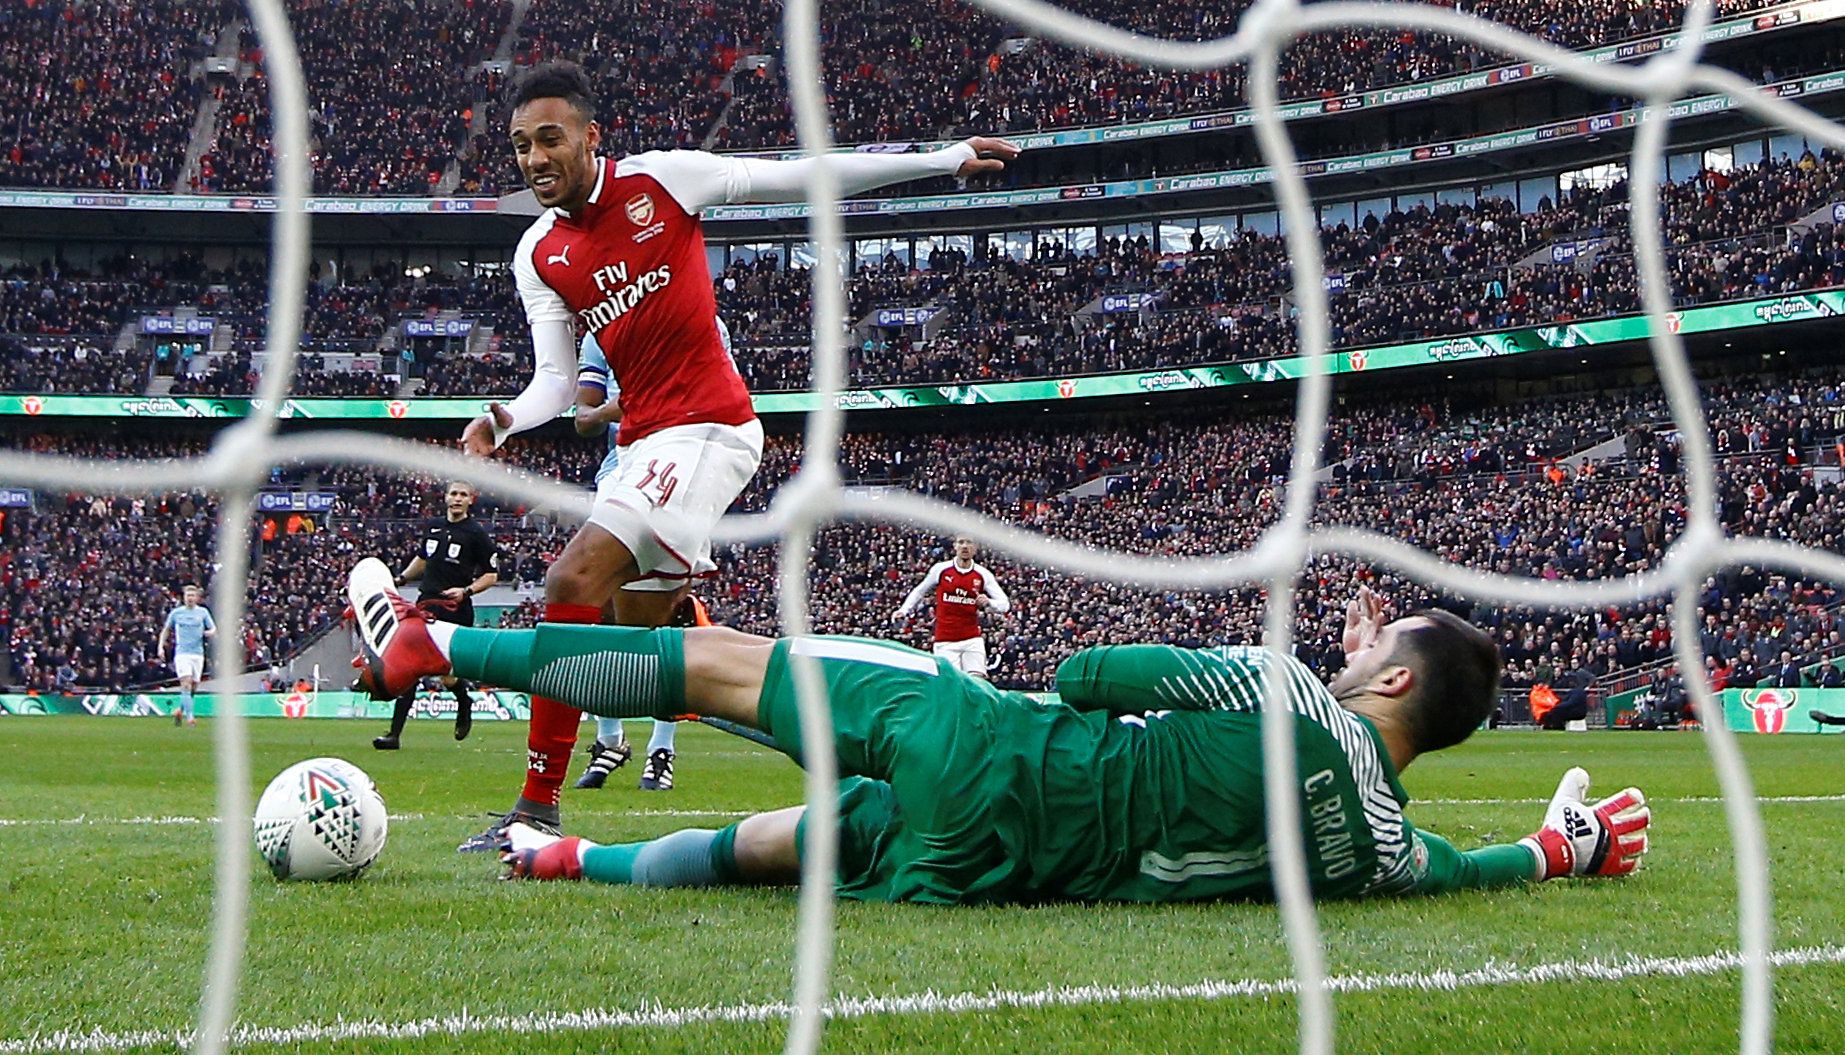 Soccer Football - Carabao Cup Final - Arsenal vs Manchester City - Wembley Stadium, London, Britain - February 25, 2018   Manchester City's Claudio Bravo saves after Arsenal's Pierre-Emerick Aubameyang is tackled by Kyle Walker    REUTERS/Peter Nicholls     EDITORIAL USE ONLY. No use with unauthorized audio, video, data, fixture lists, club/league logos or 